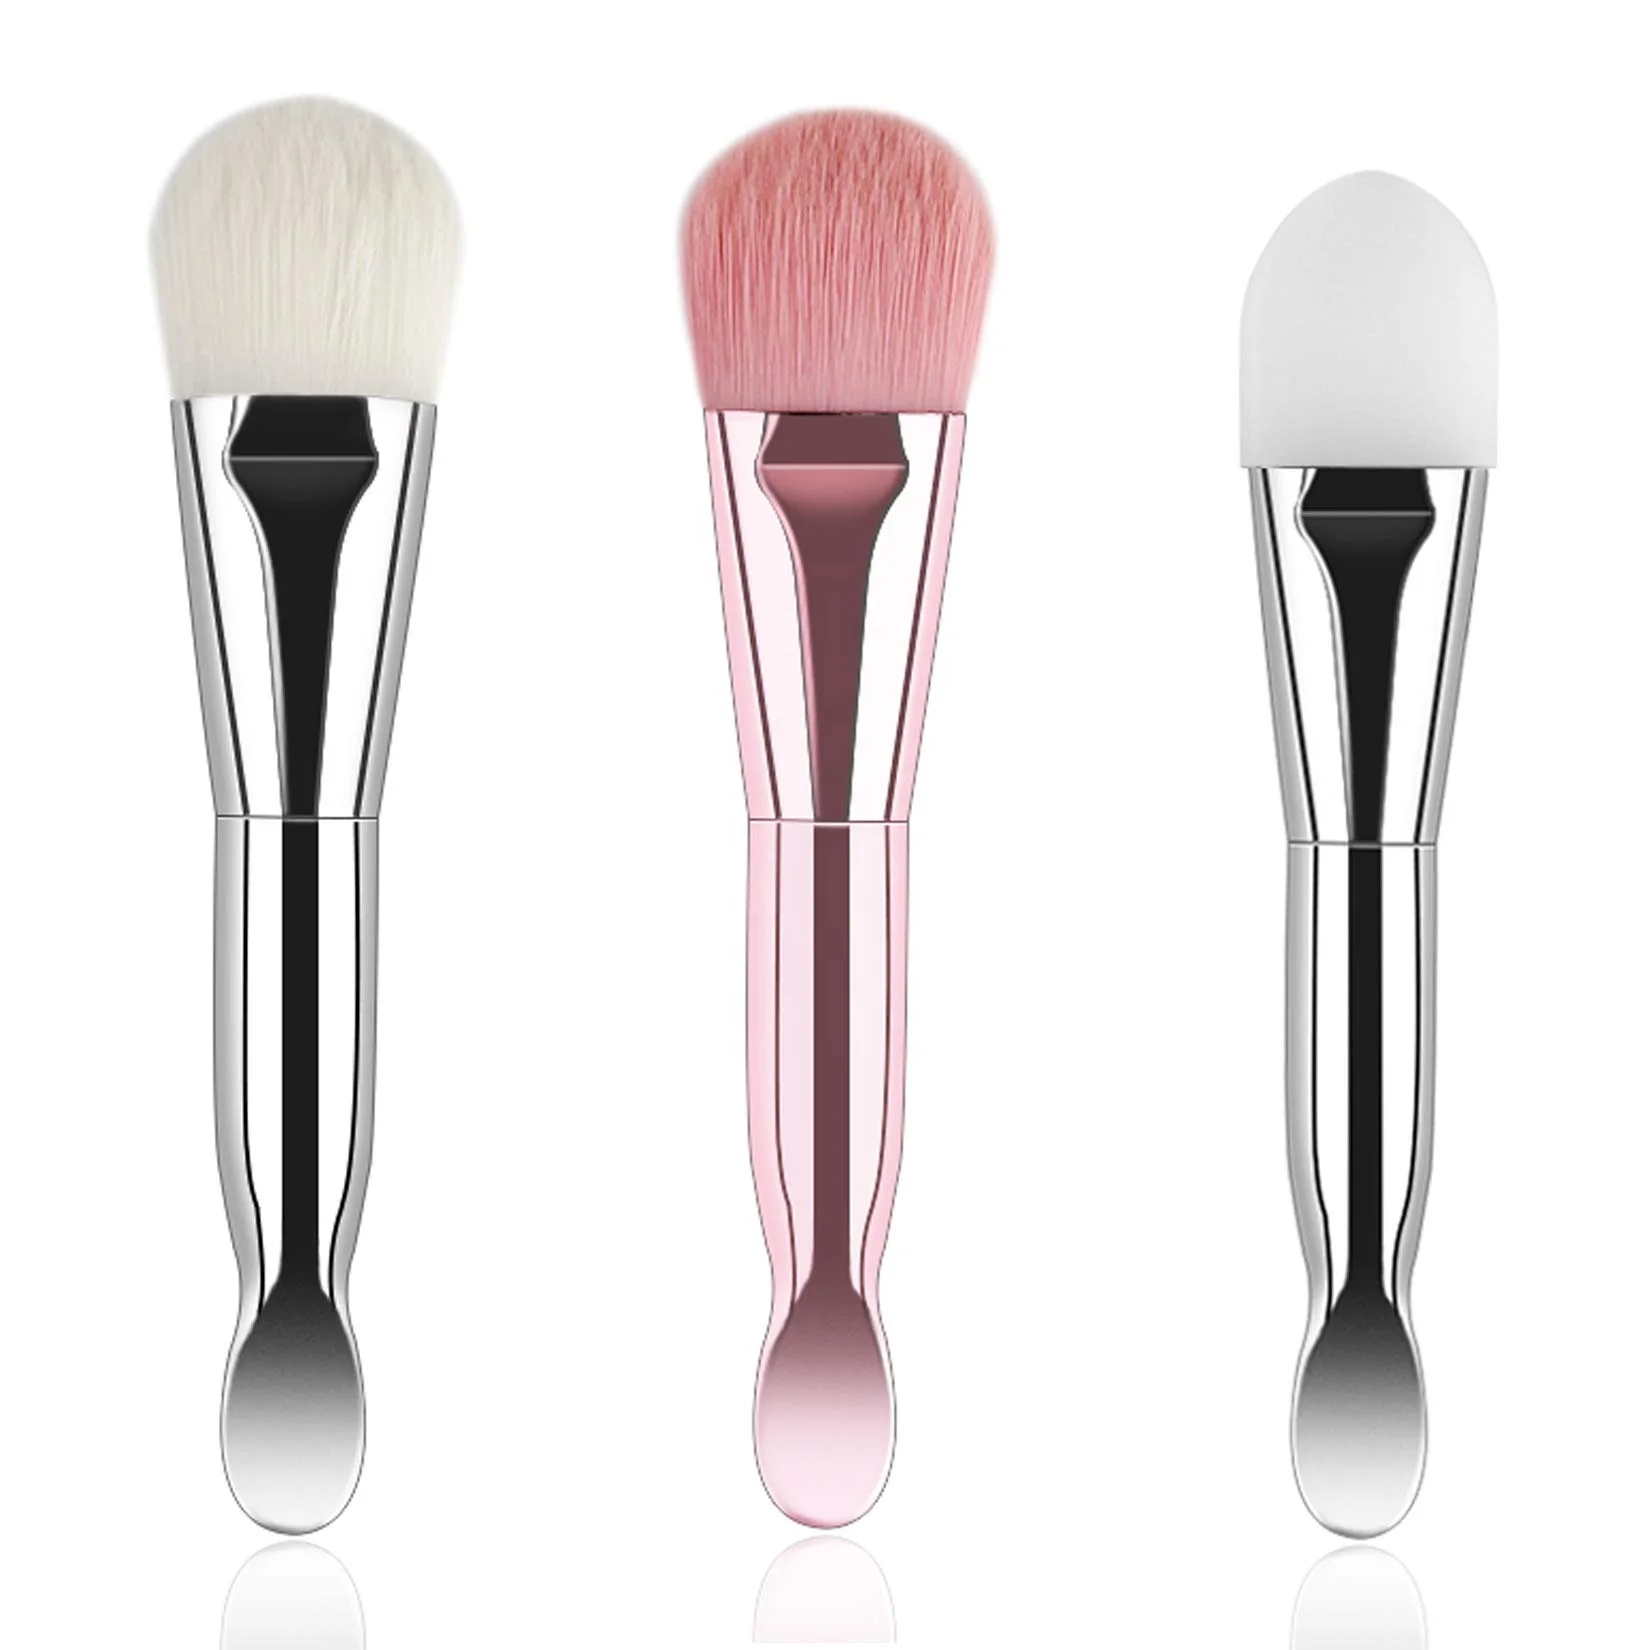 

Silicone Face Mask Brush Applicator Double-Ended Makeup Beauty Tool Soft Bristles Facial Mud Makeup Applicator Brush